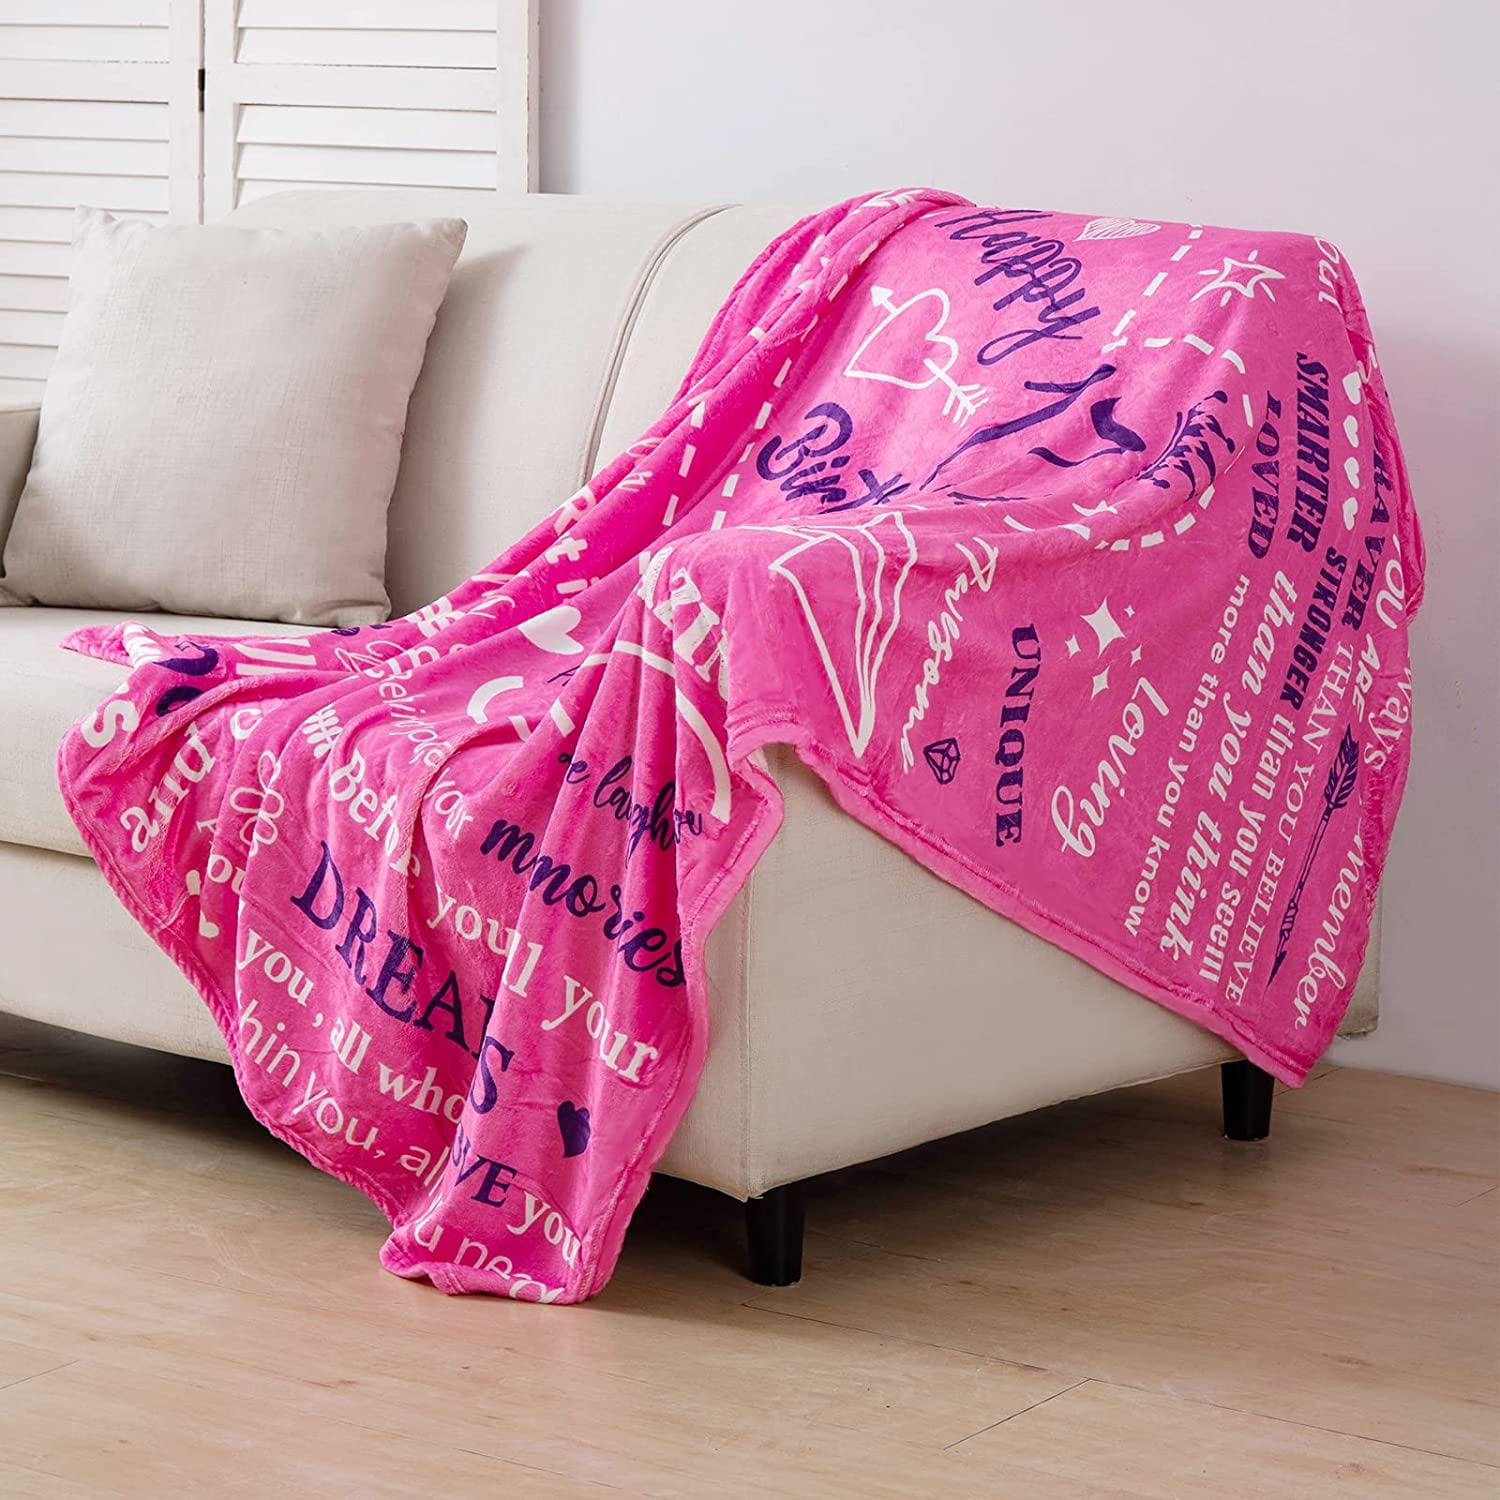  Paihvcn Gifts for 15 Year Old Girls, 15th Birthday Gifts for  Teen Girls, Quinceanera Gifts, 15th Birthday Decorations for Girls, 15 Year  Old Girl Birthday Gift Ideas Throw Blanket 60x50 